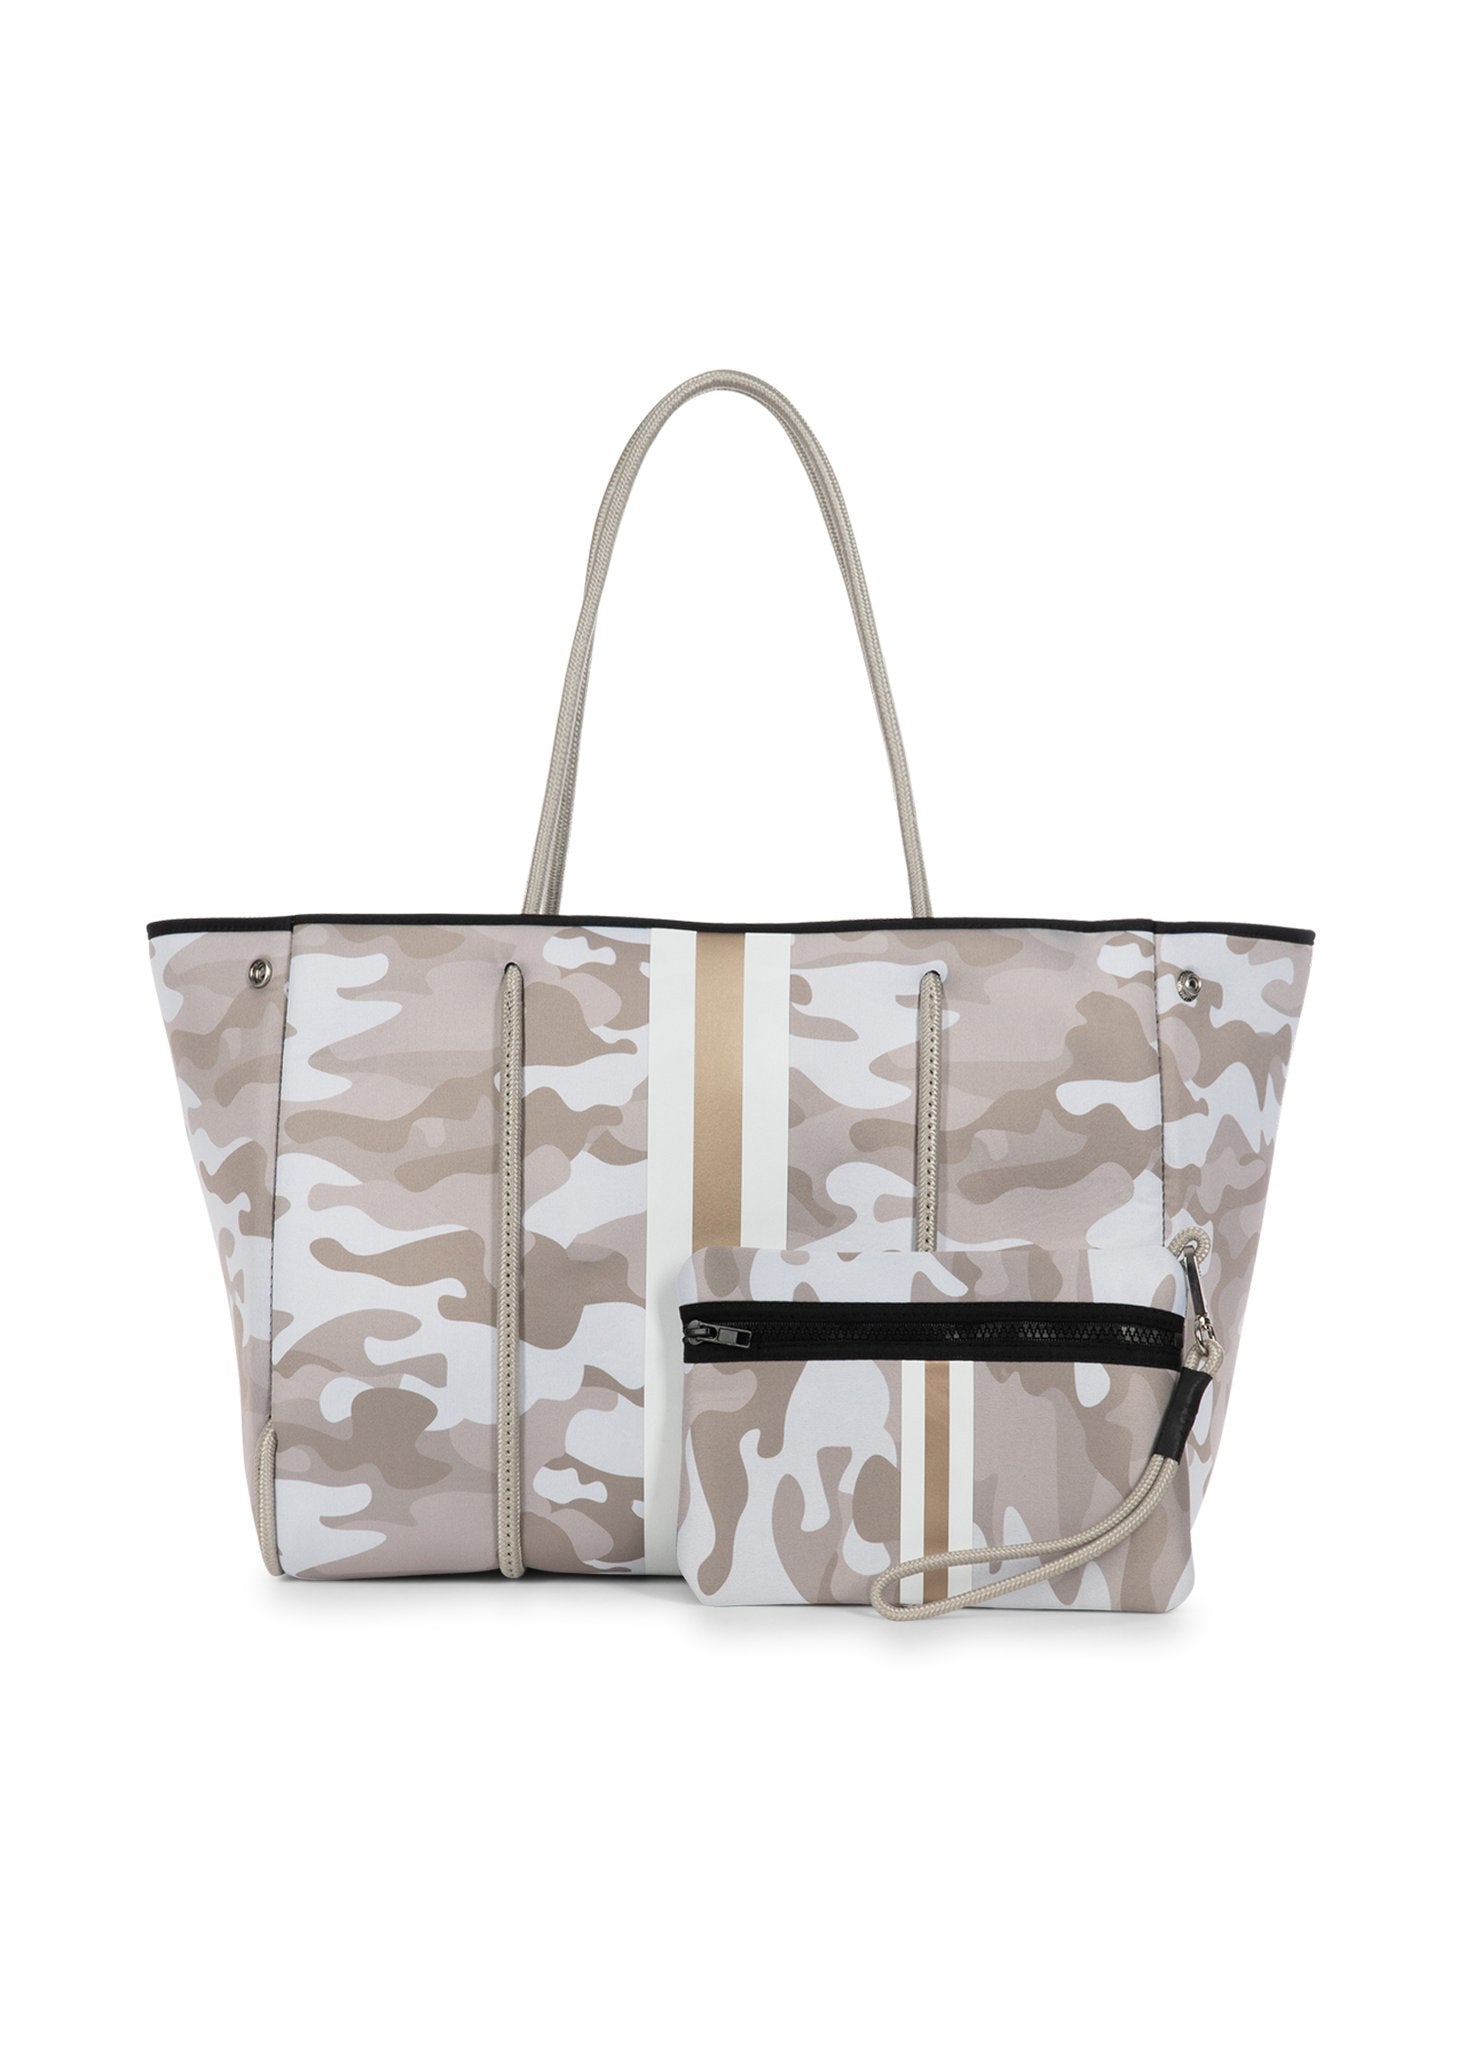 Haute Shore Greyson Tote Bag - Showoff – The Impeccable Pig